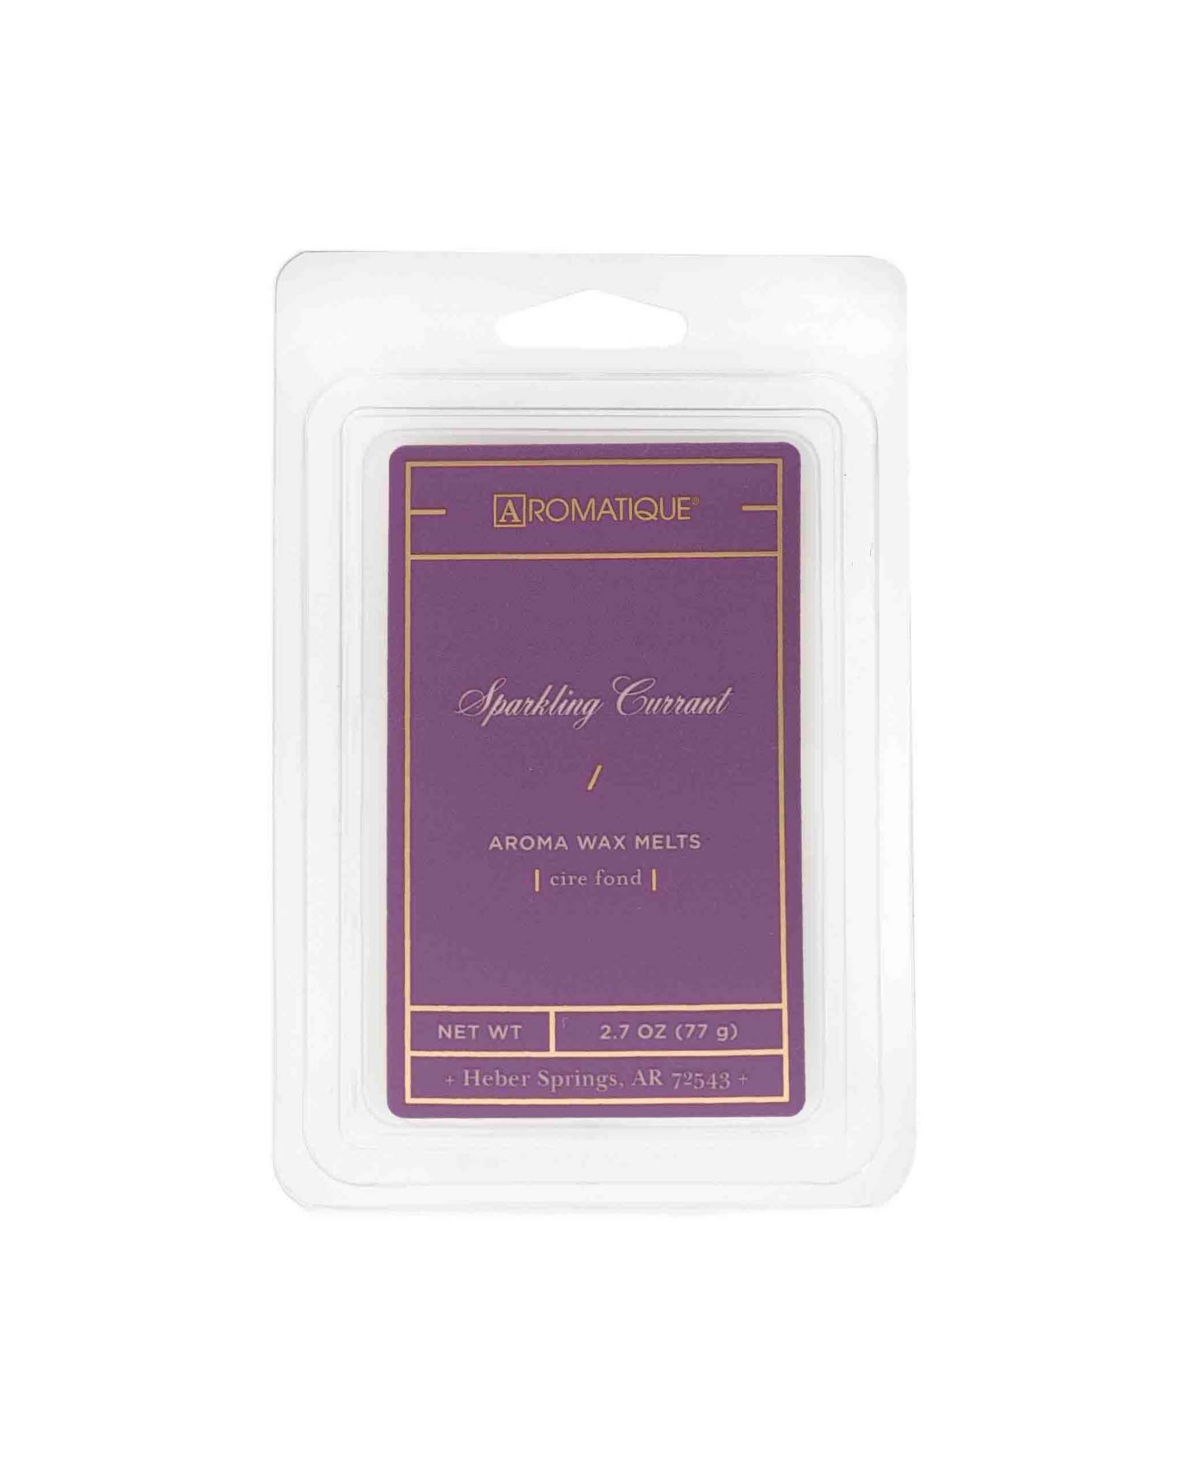 Aromatique Sparkling Currant Wax Melts In Plastic Tray